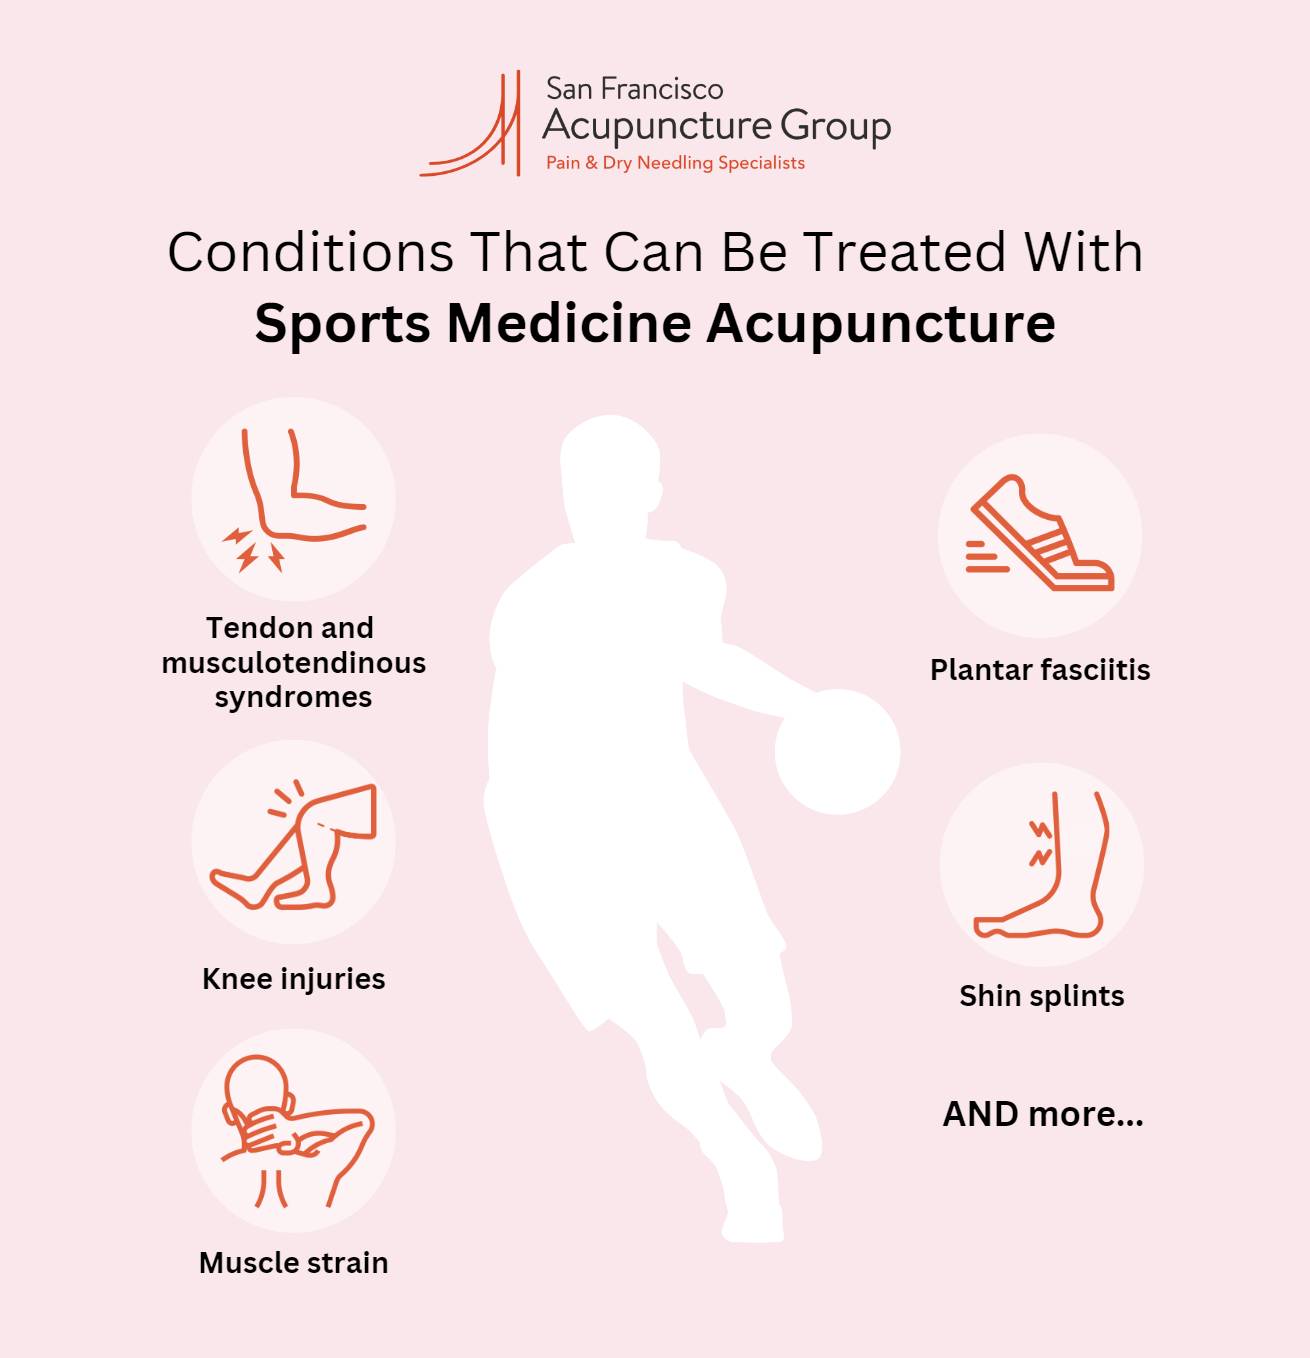 Infographic depicting list of conditions that can be treated with sports medicine acupuncture: Tendon and musculotendinous syndromes; elbow lateral/medial epicondylitis (tennis/golfer’s elbow); knee patellar tendonitis; shoulder rotator cuff injury, impingement; ankle achilles tendonitis; wrist De Quervain’s tendinosis/tenosynovitis, ulnar tendonitis; hip deep gluteal tendonopathy; muscle strain of hamstring, calf, neck, back; knee injuries, patellar tendonitis (jumper’s knee), ligament injuries (ACL, MCL tears), meniscus tears, chondromalacia patella (runner’s knee), iliotibial band syndrome; runner’s stitch syndrome; Sshin splints (tibial stress syndrome); and more.